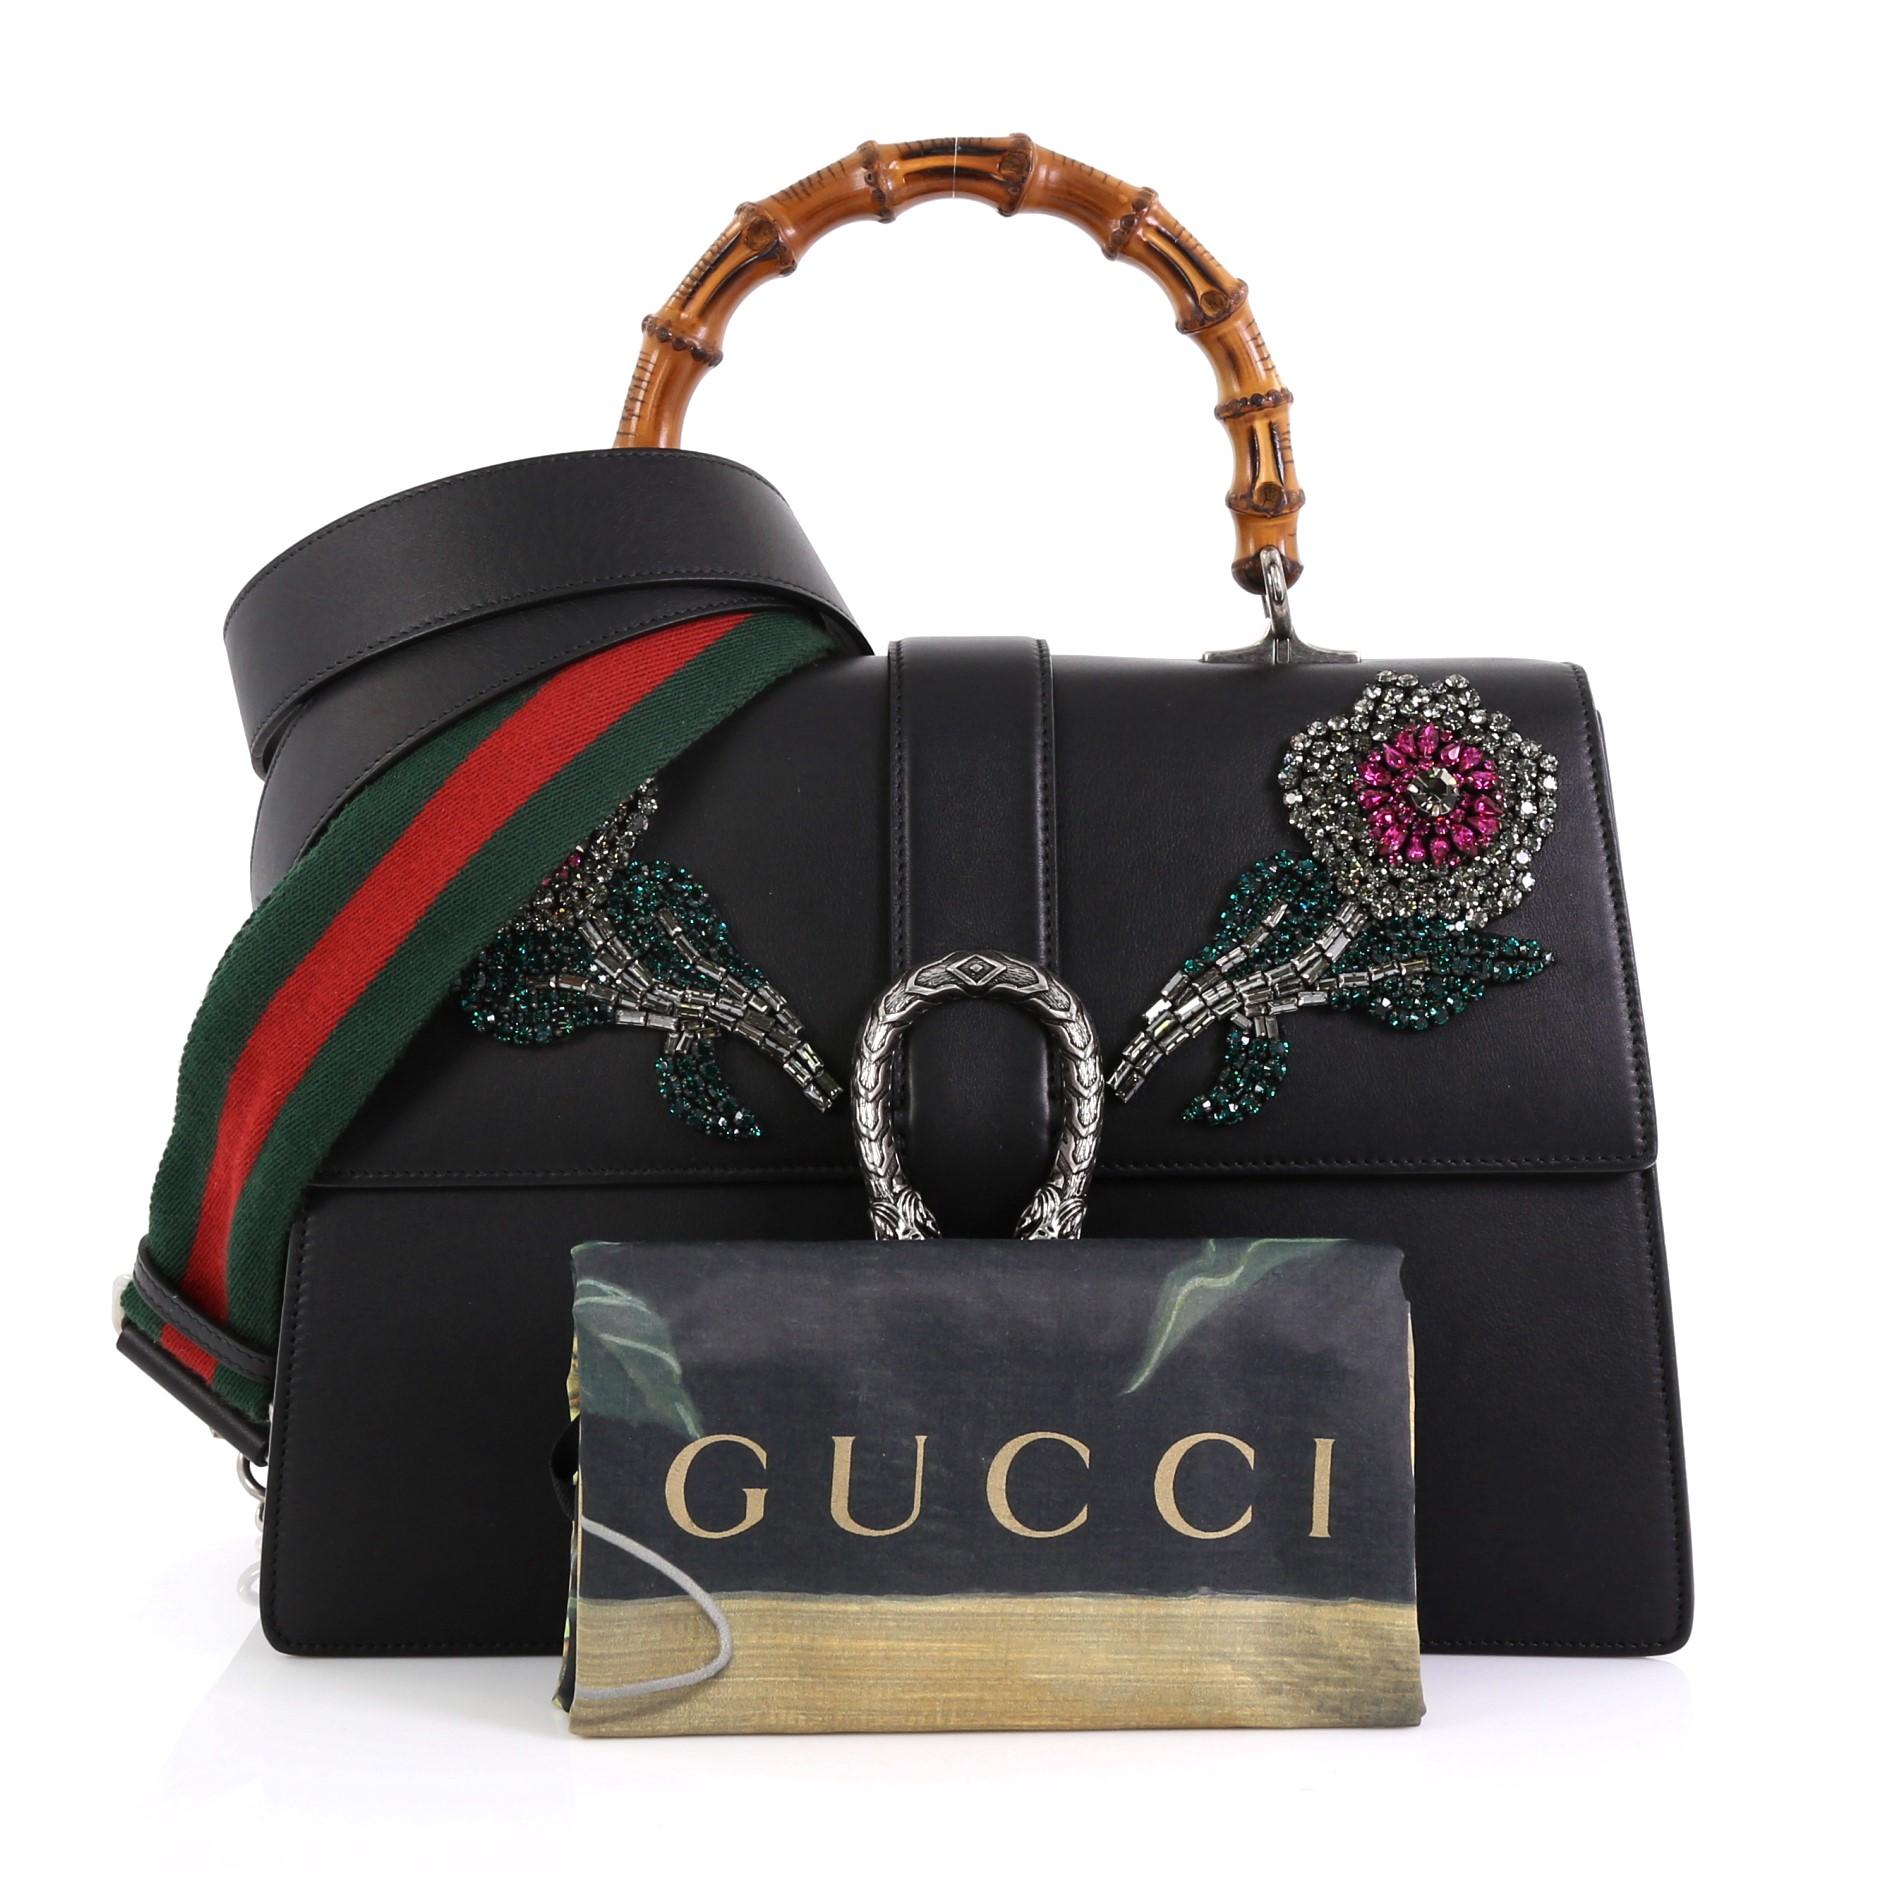 This Gucci Dionysus Bamboo Top Handle Bag Embellished Leather Large, crafted in black embellished leather, features bamboo top handle, multicolored beaded floral embellishment, textured tiger head spur detail, and aged silver-tone hardware. Its flap